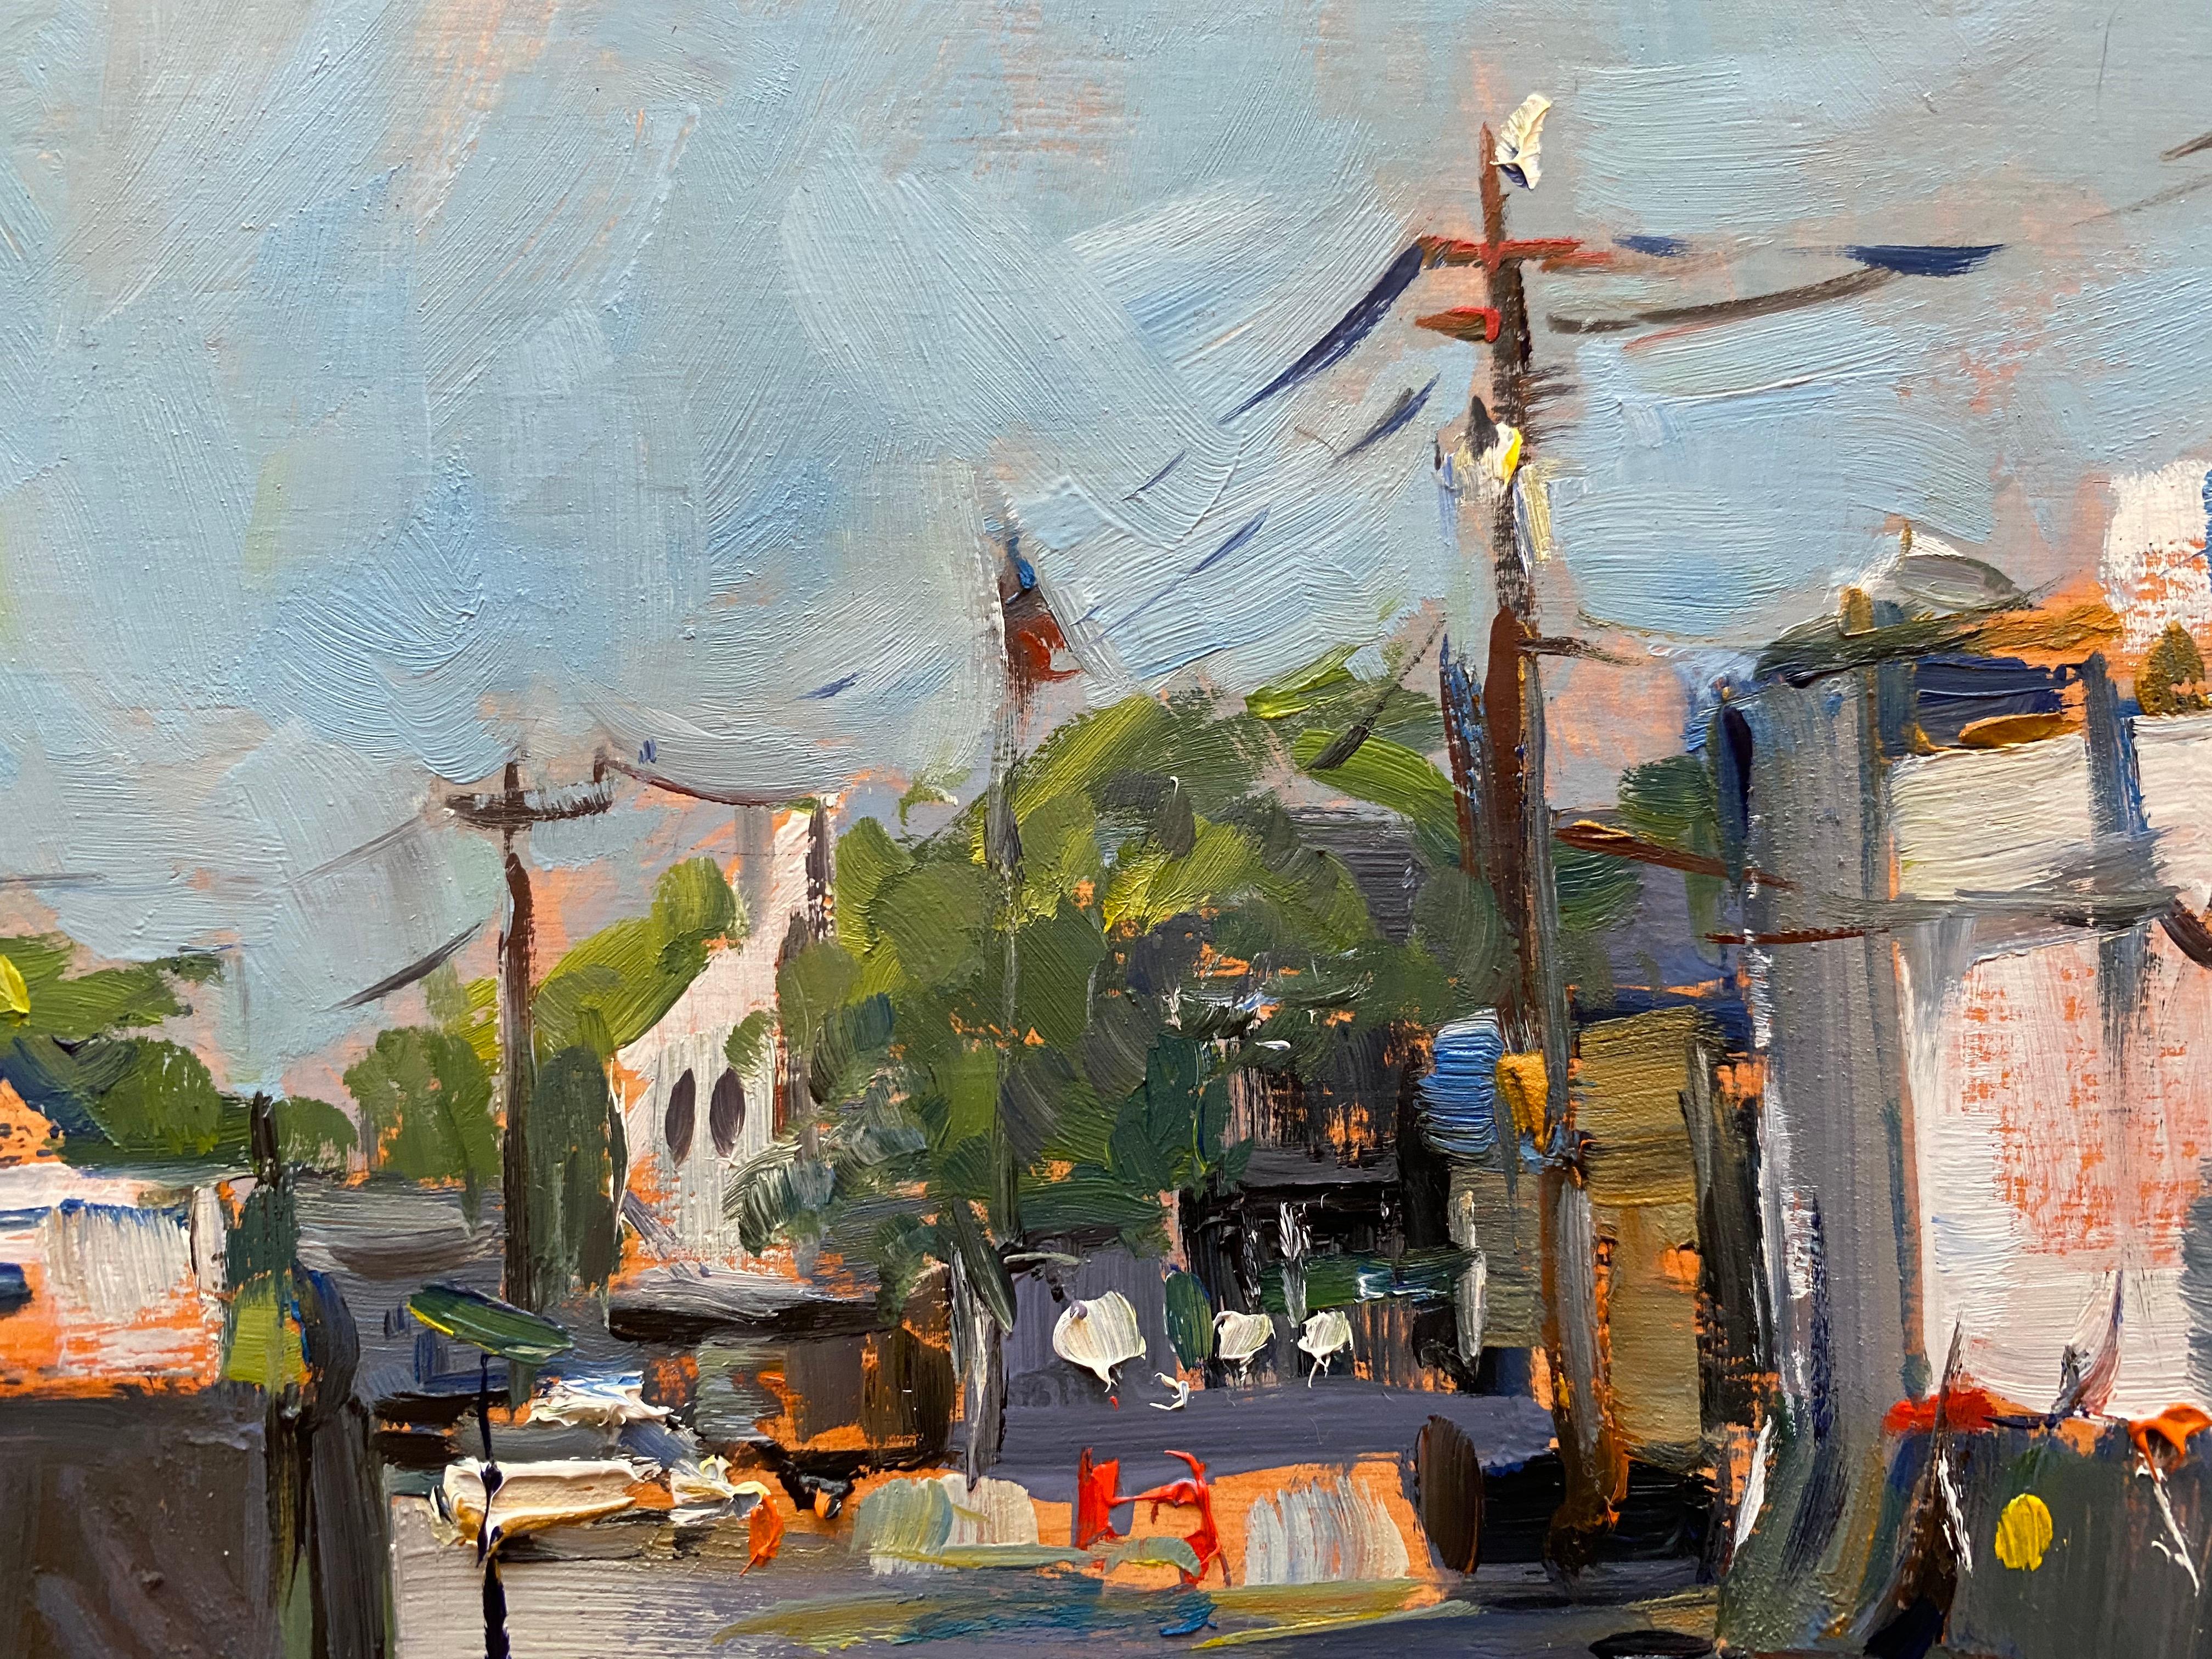 Sag Harbor Cinema Under Construction - Realist Painting by Tina Orsolic Dalessio